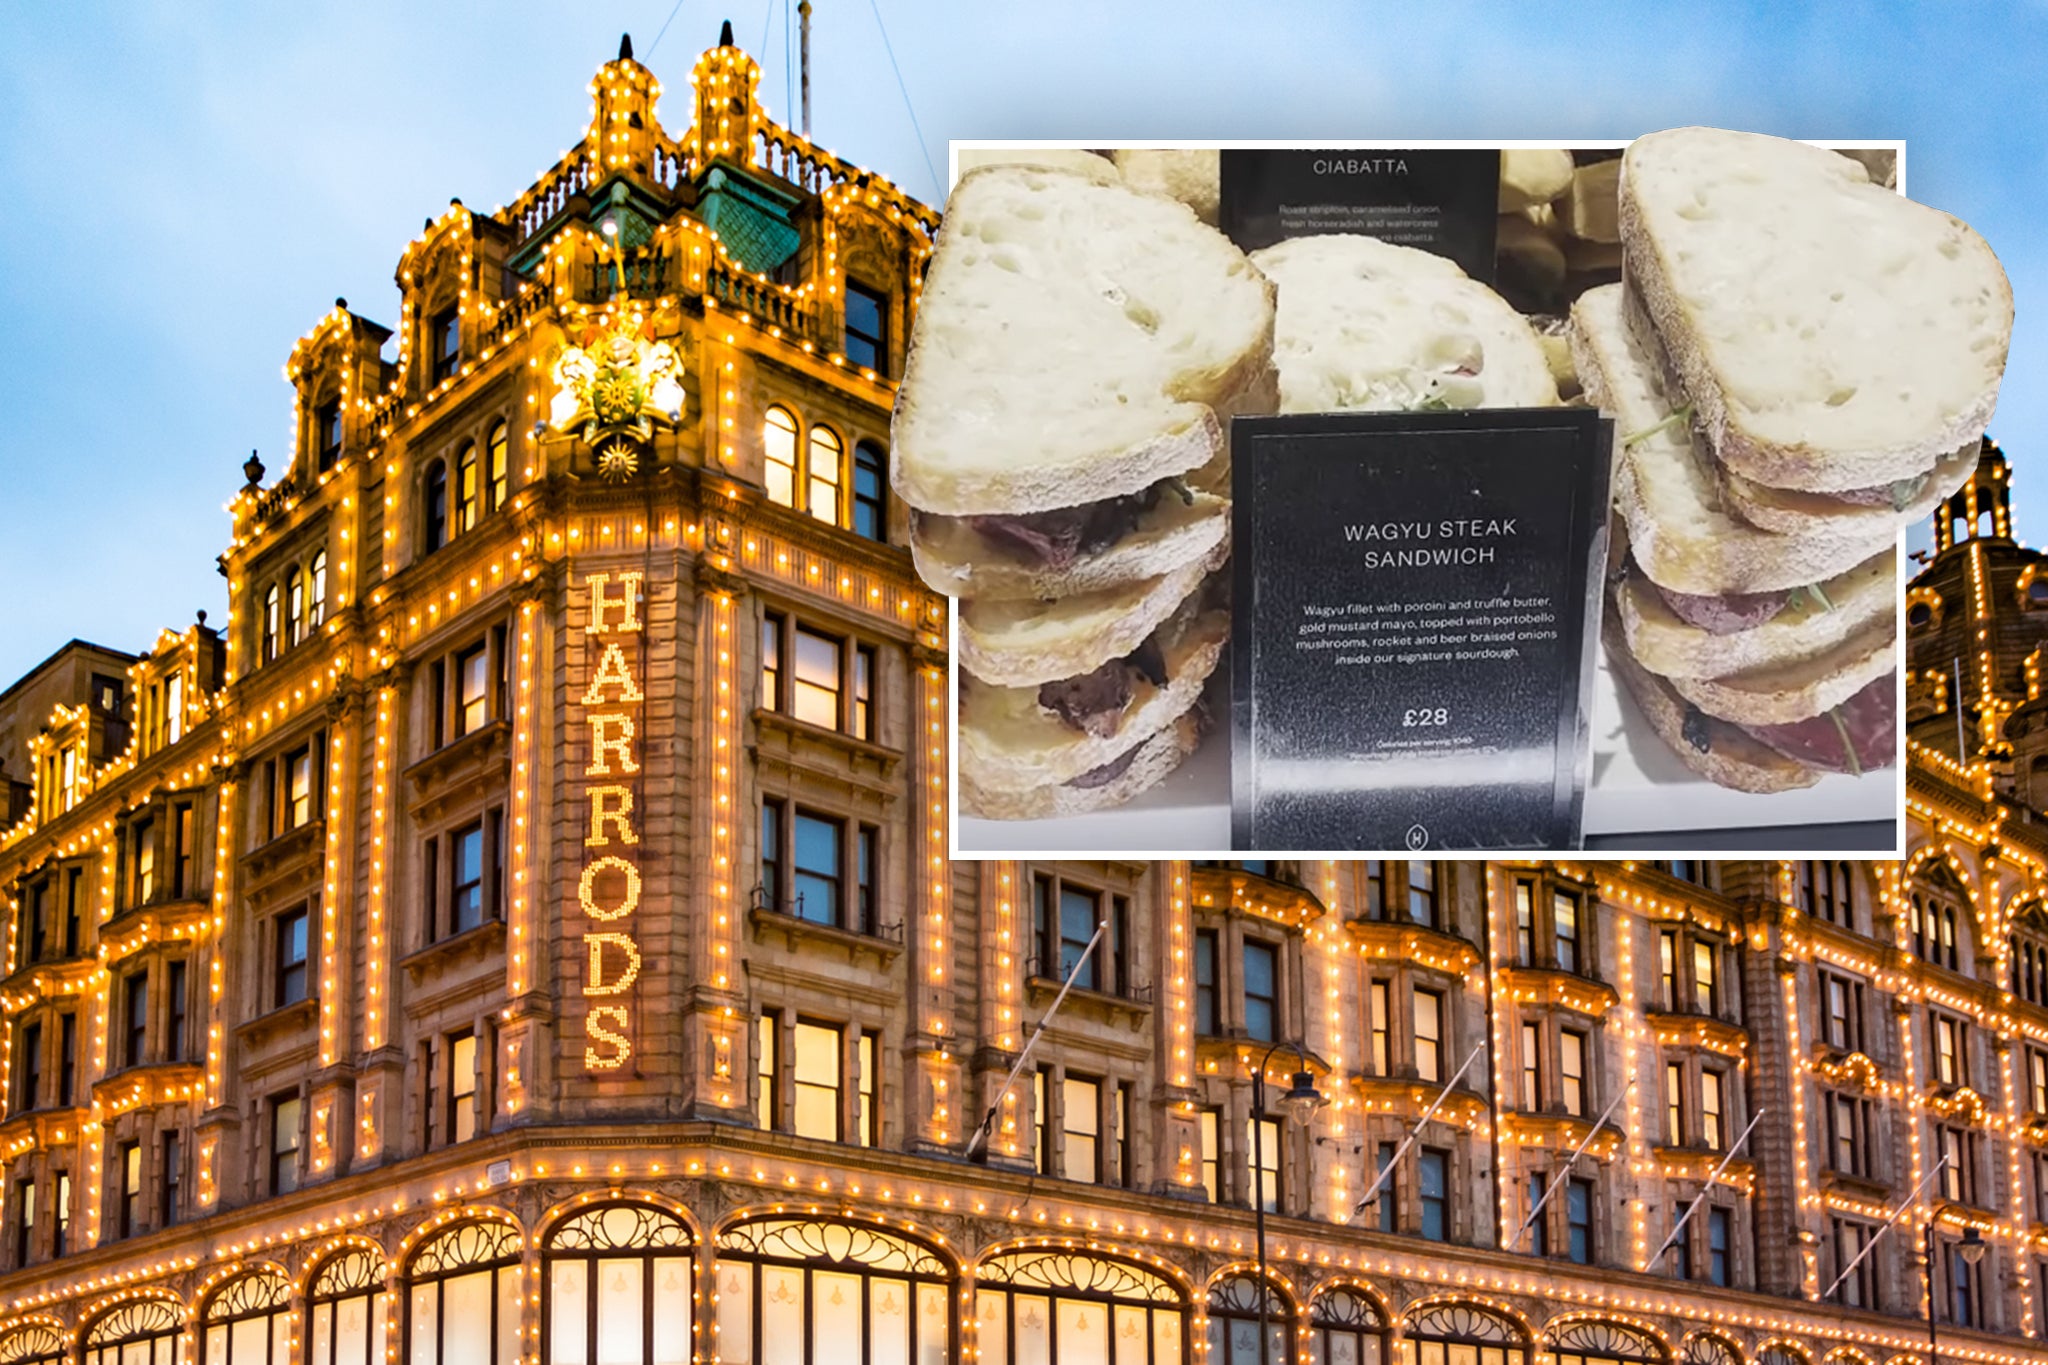 Harrods’ £28 wagyu steak sandwich is the most expensive butty in Britain